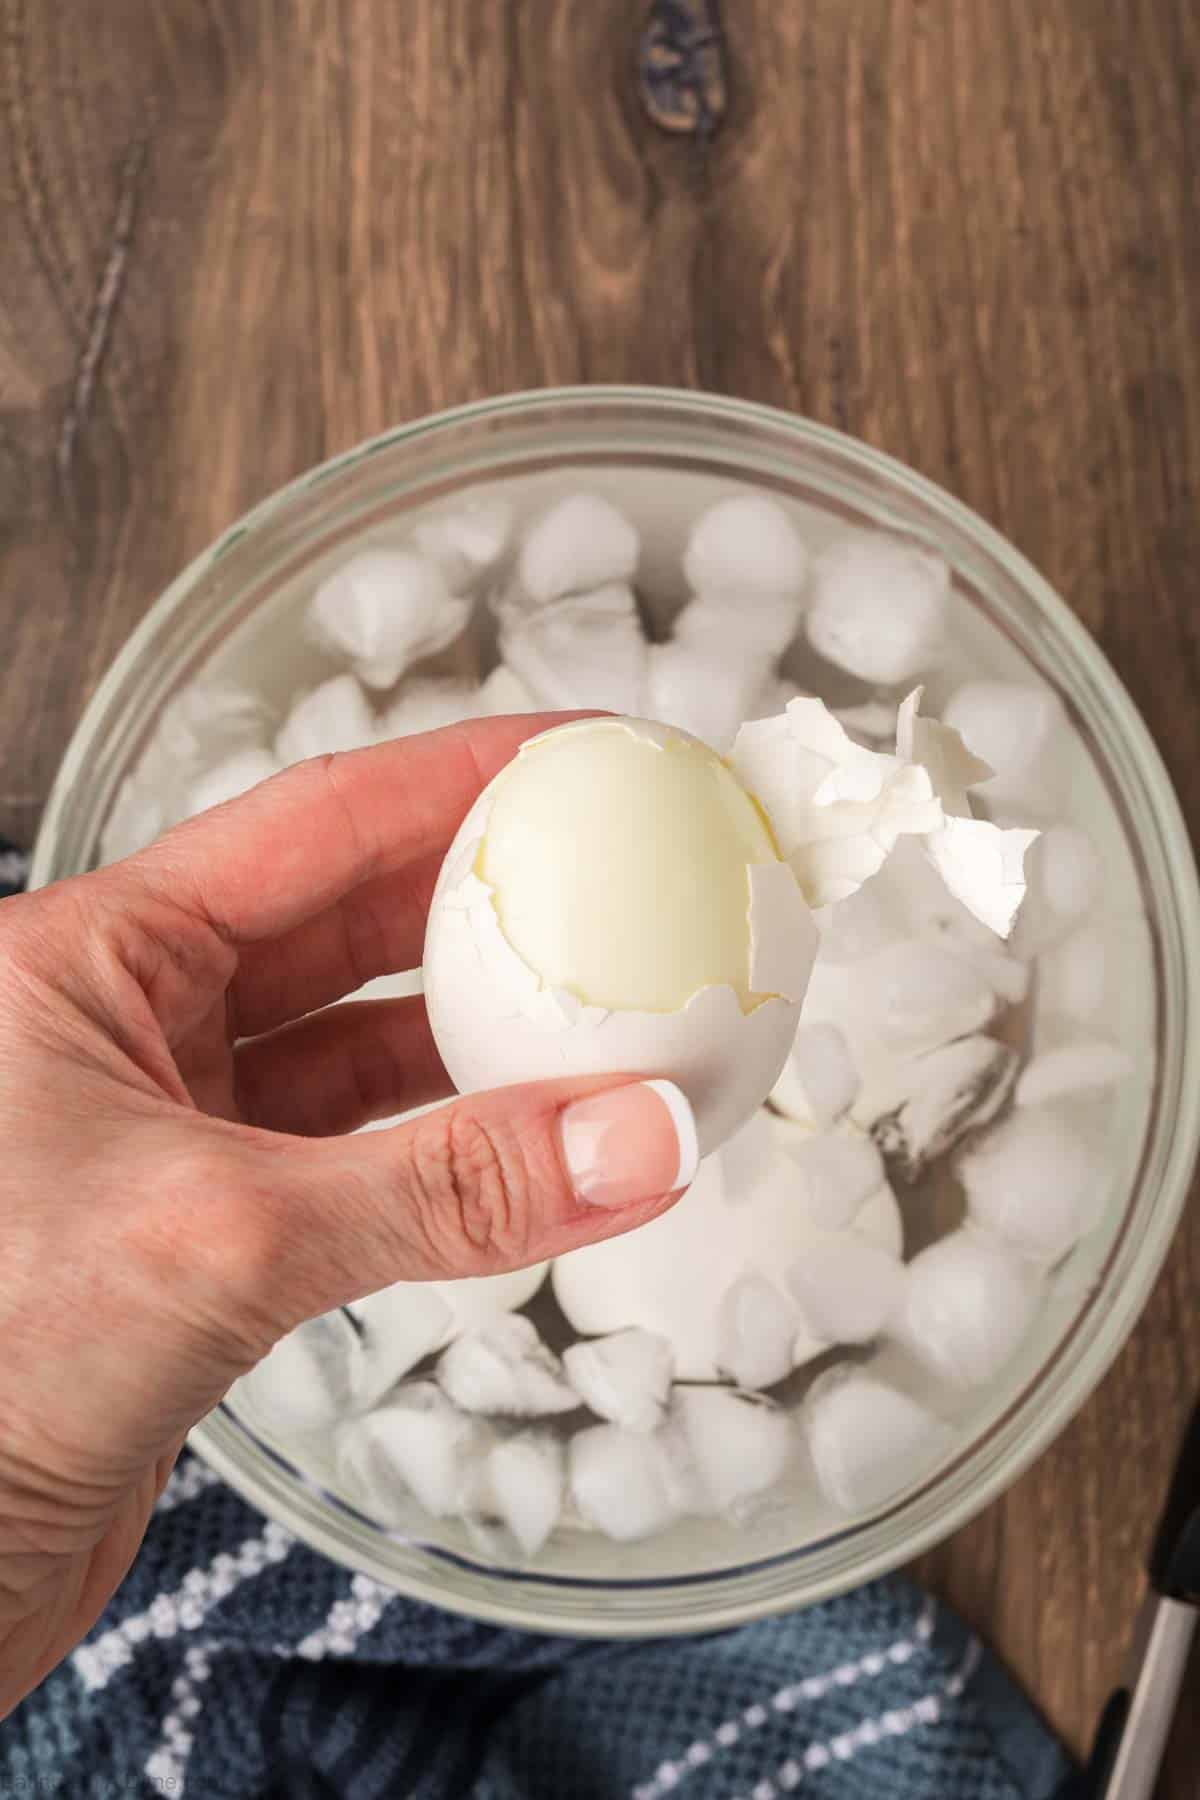 Peeled eggs being held with a bowl of ice water in the background